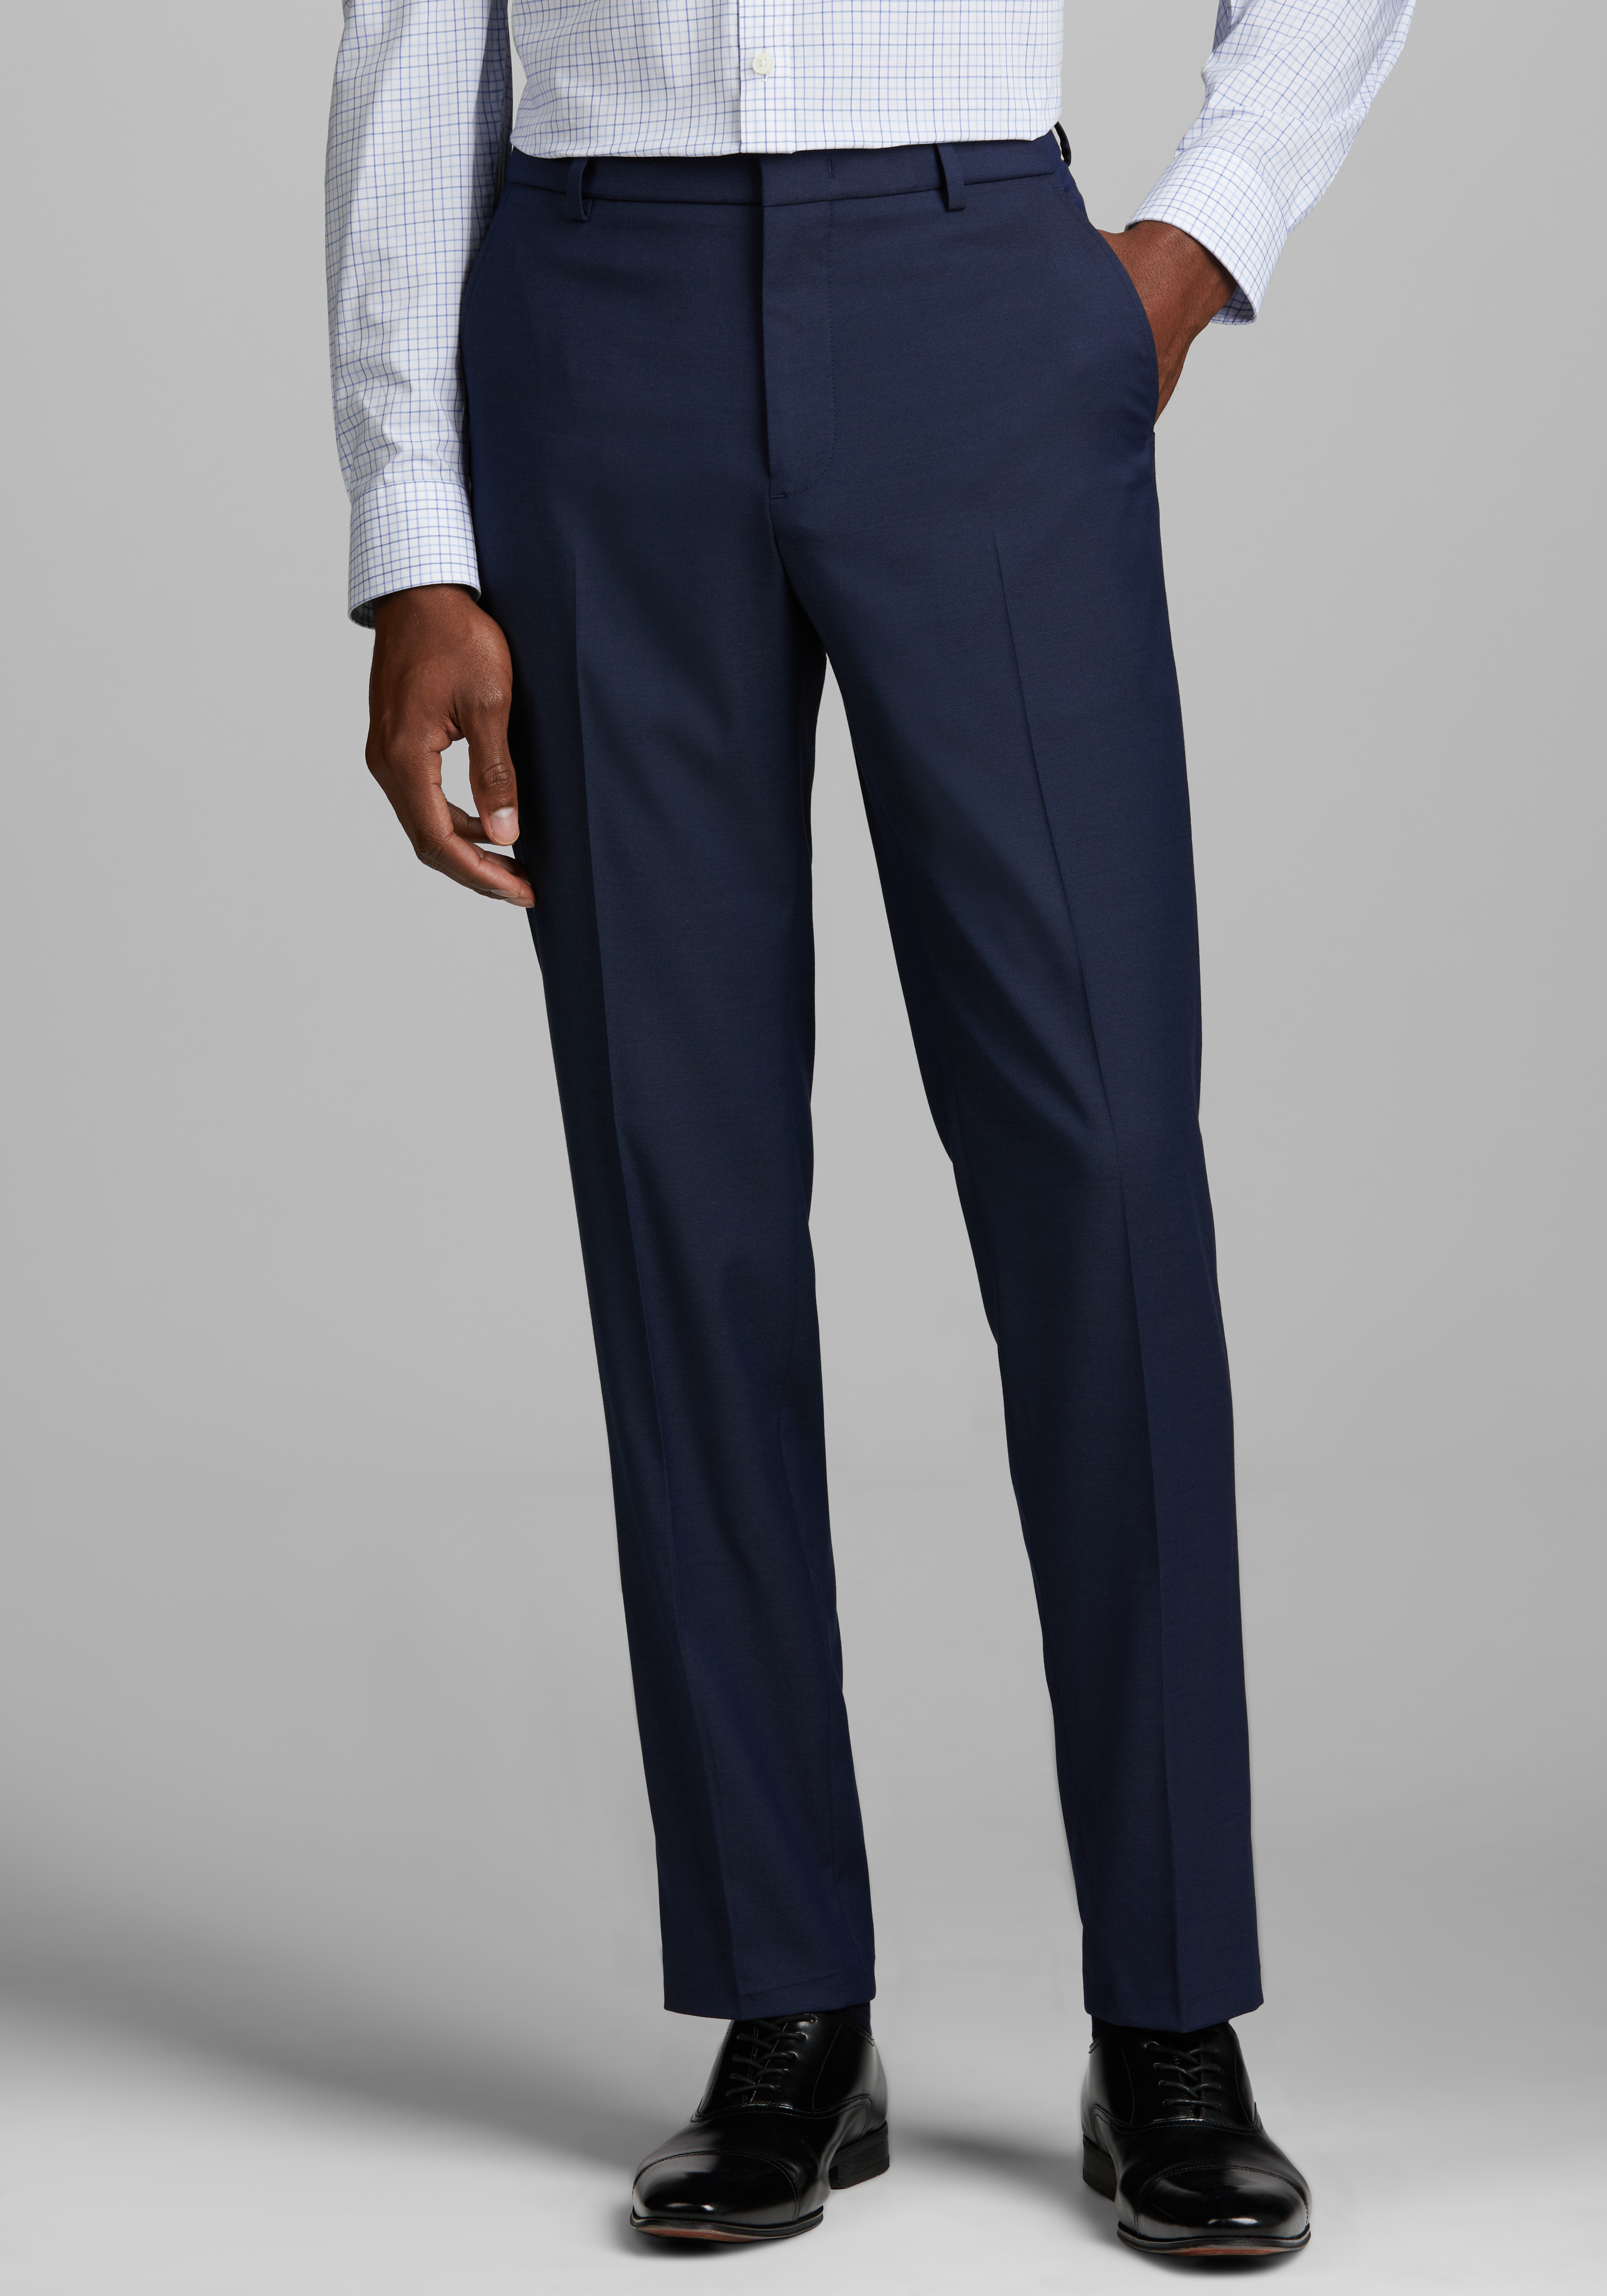 Navy Dress Pants with White Long Sleeve Shirt Outfits For Men (66